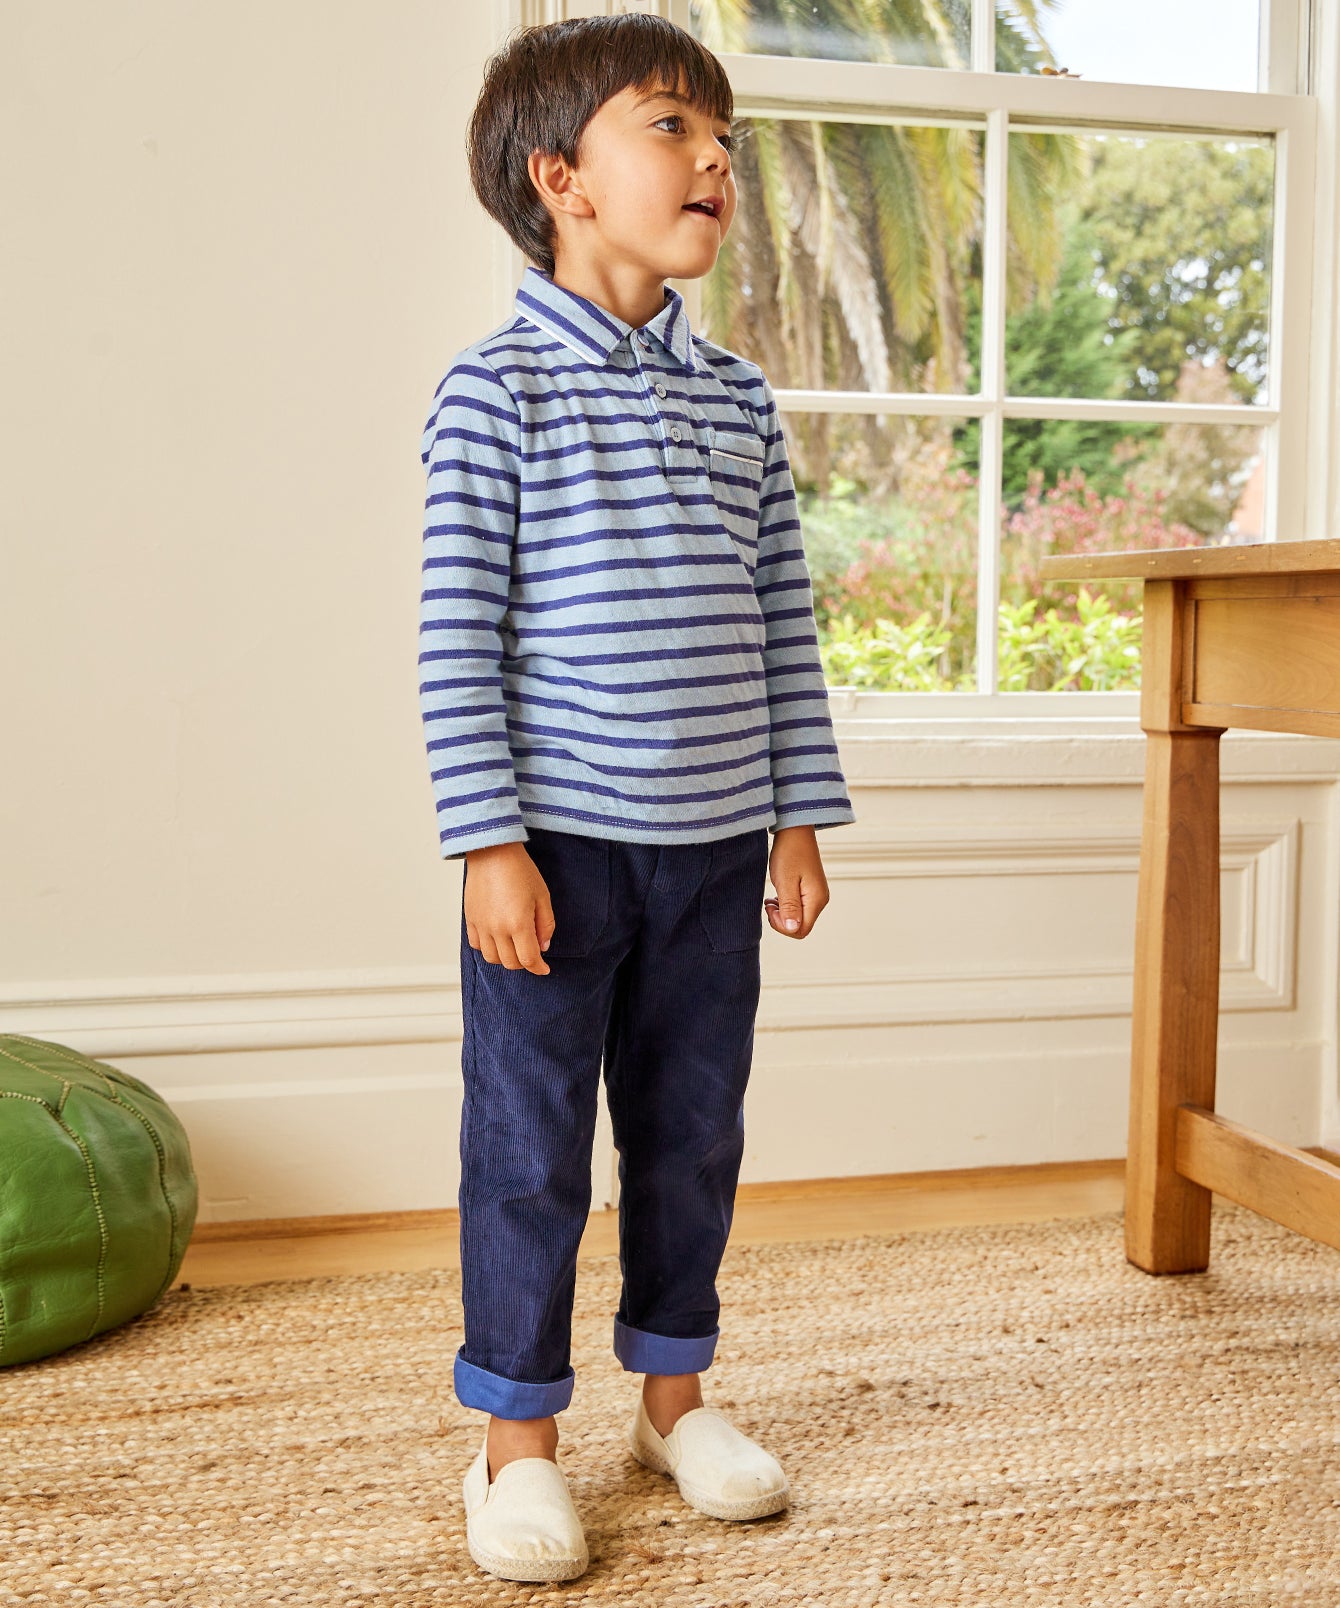 Boys Trousers - Boys Cotton Trouser Prices, Manufacturers & Suppliers